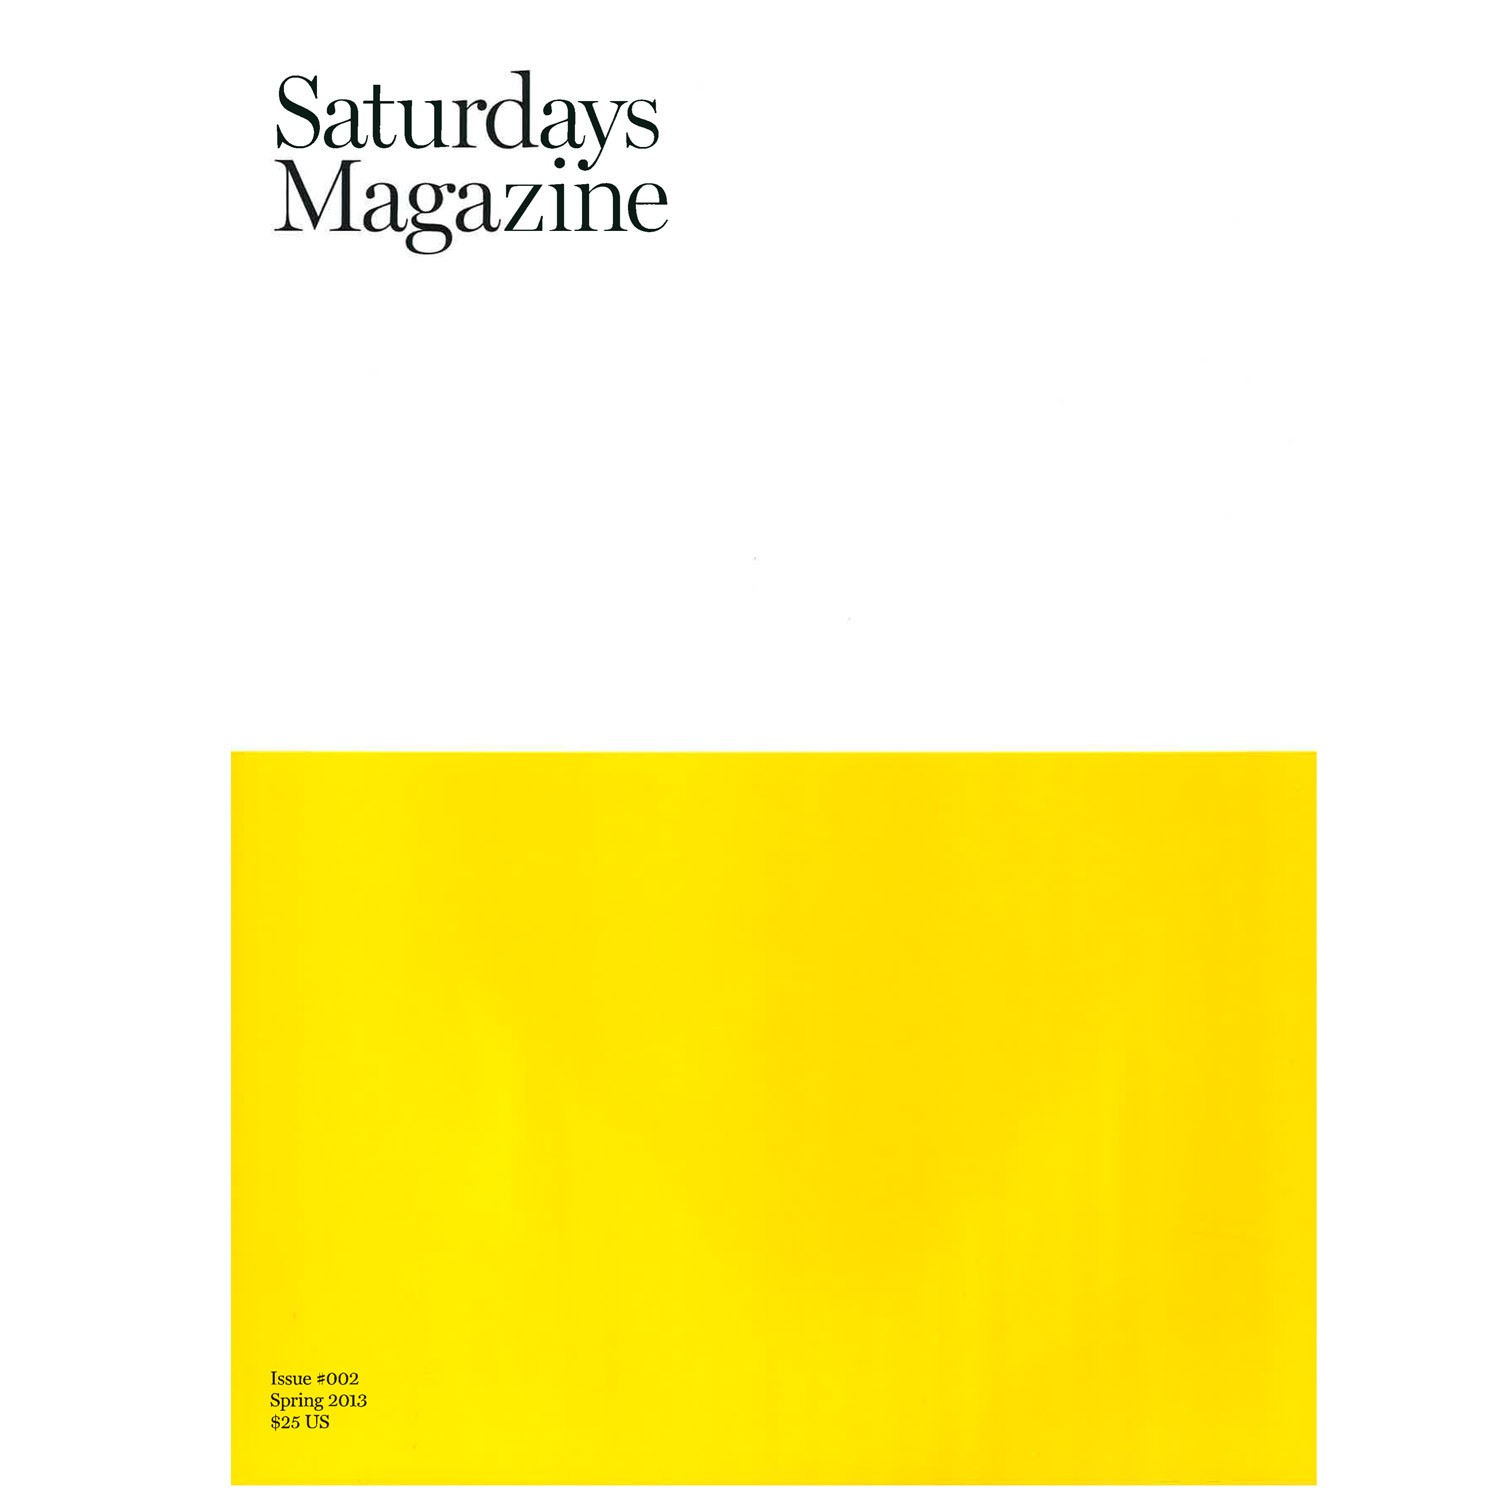 SMag_COVER2.jpg